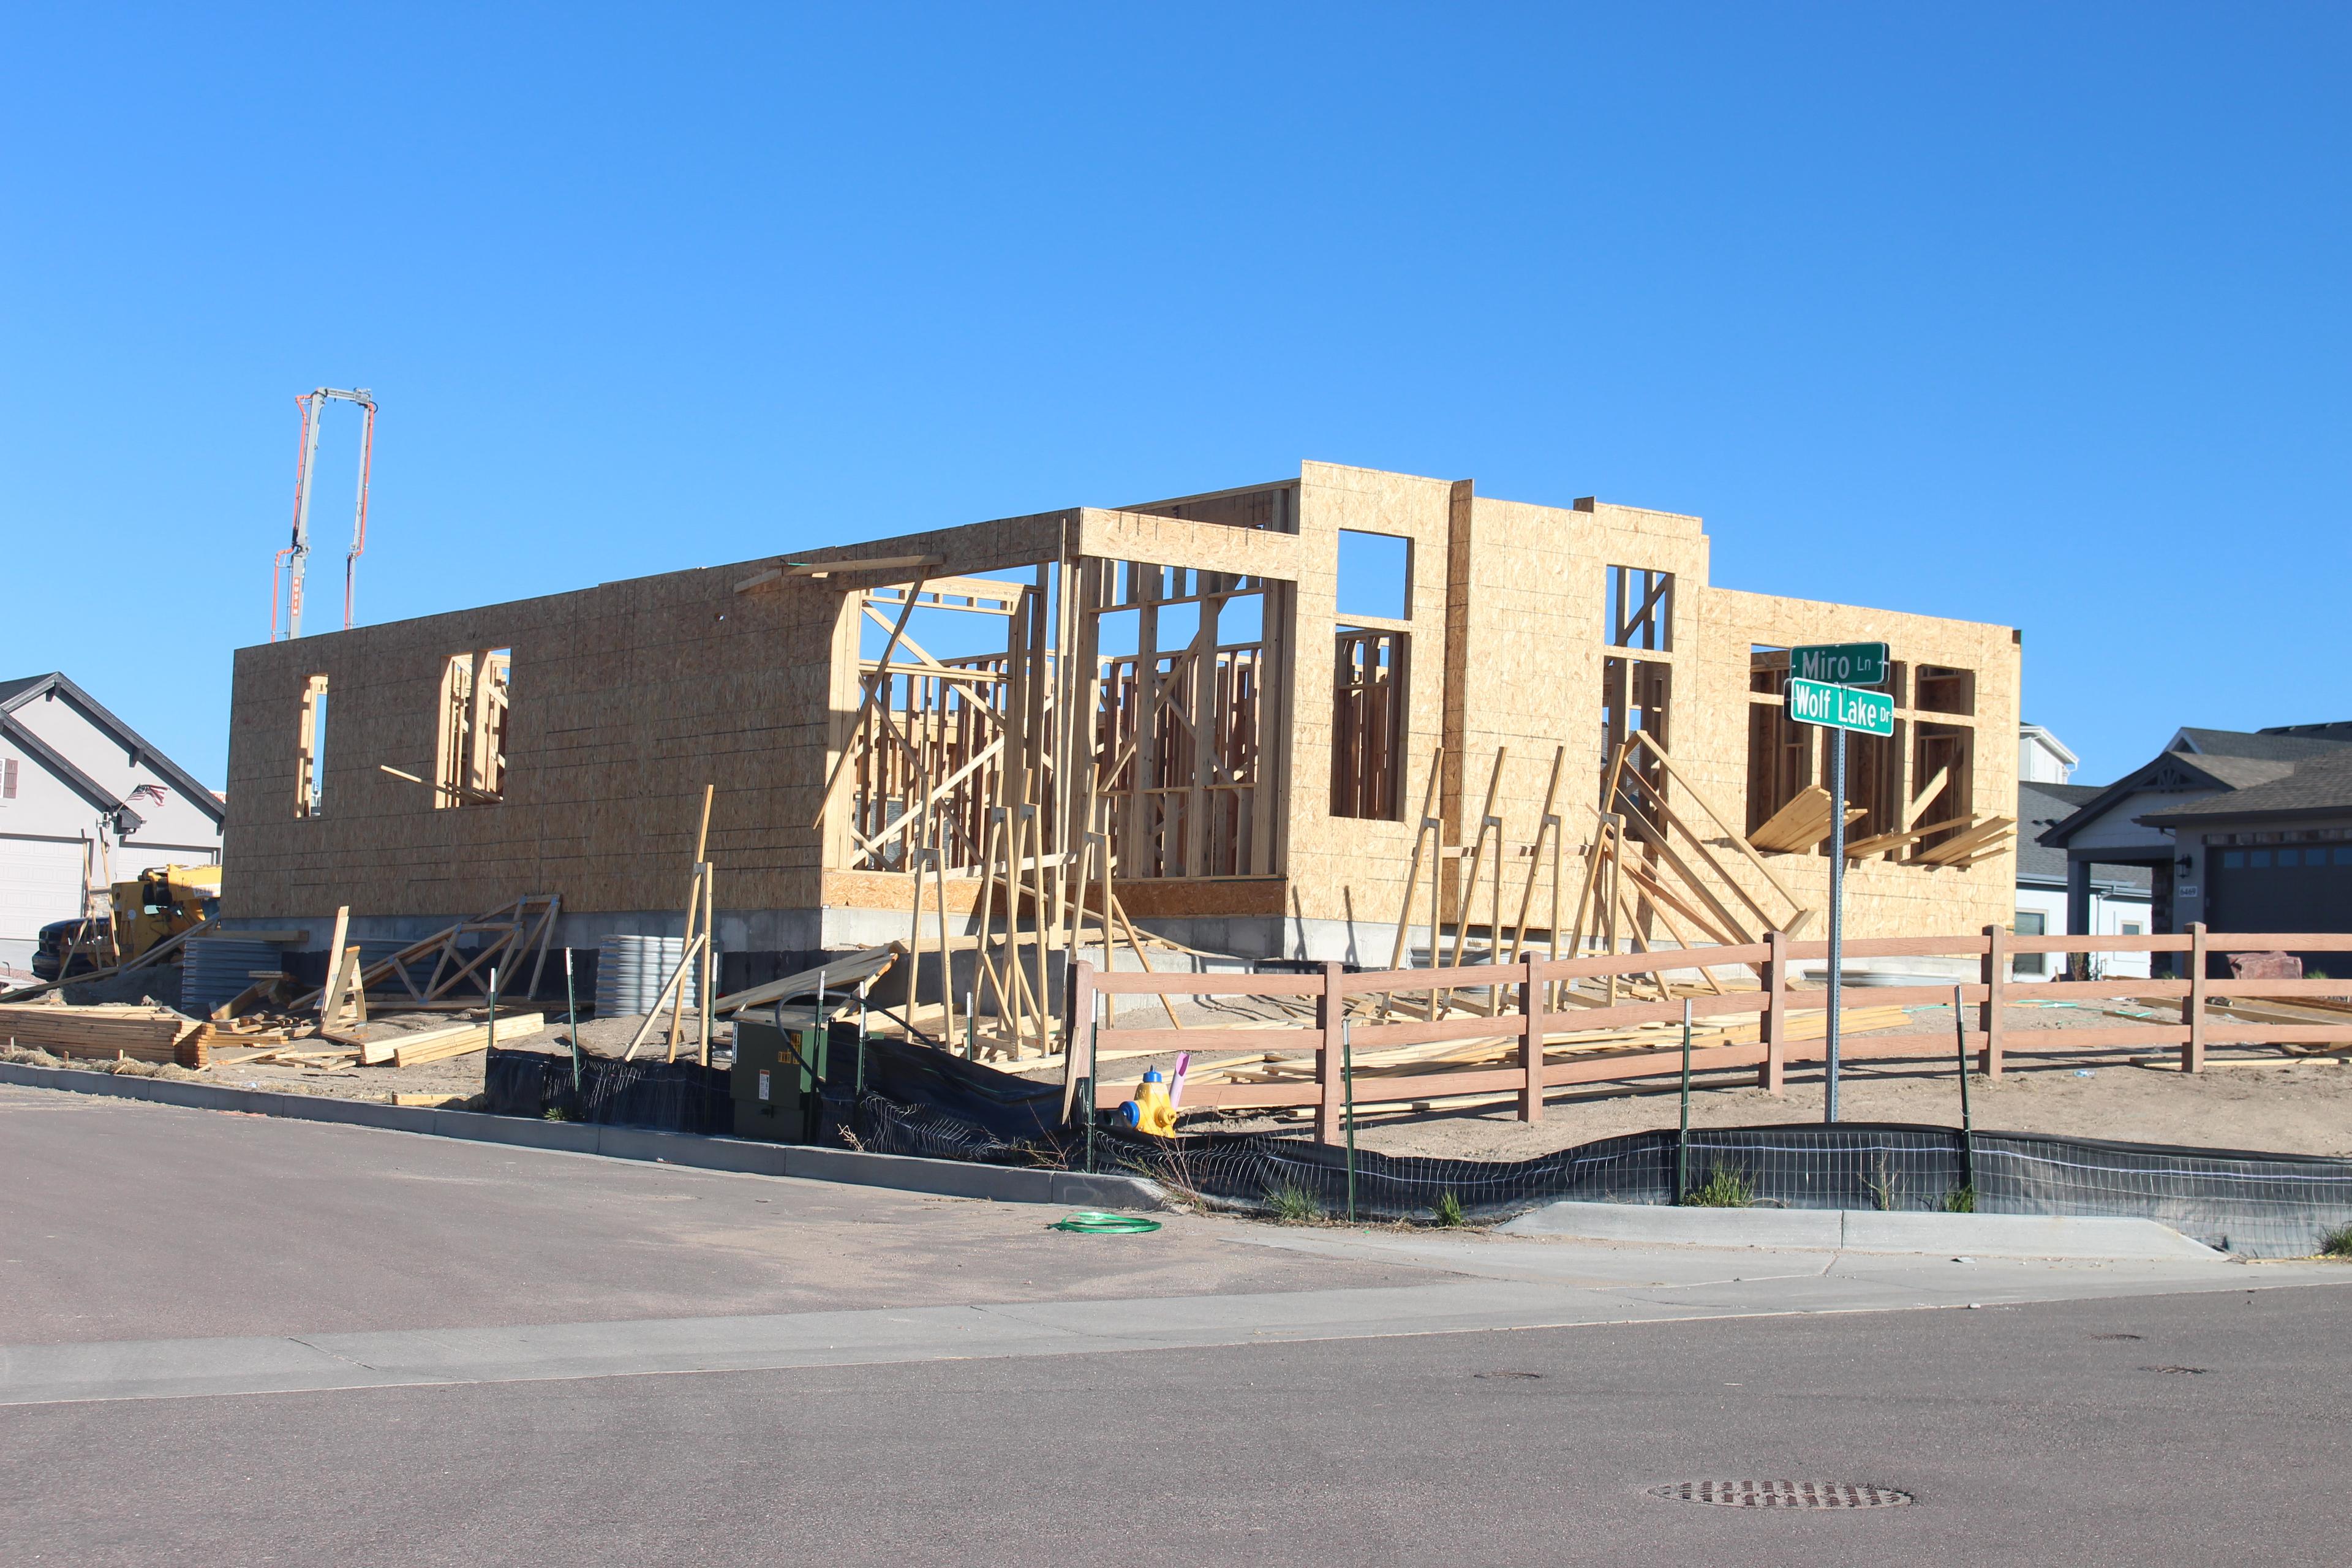 a partially constructed home with parts of the OSB walls standing but no roof yet. The framing wood is up for the interior walls. a street sign shows the house is at the corner of two paved streets called Miro lane and Wolf Lake Dr. The sky is blue.